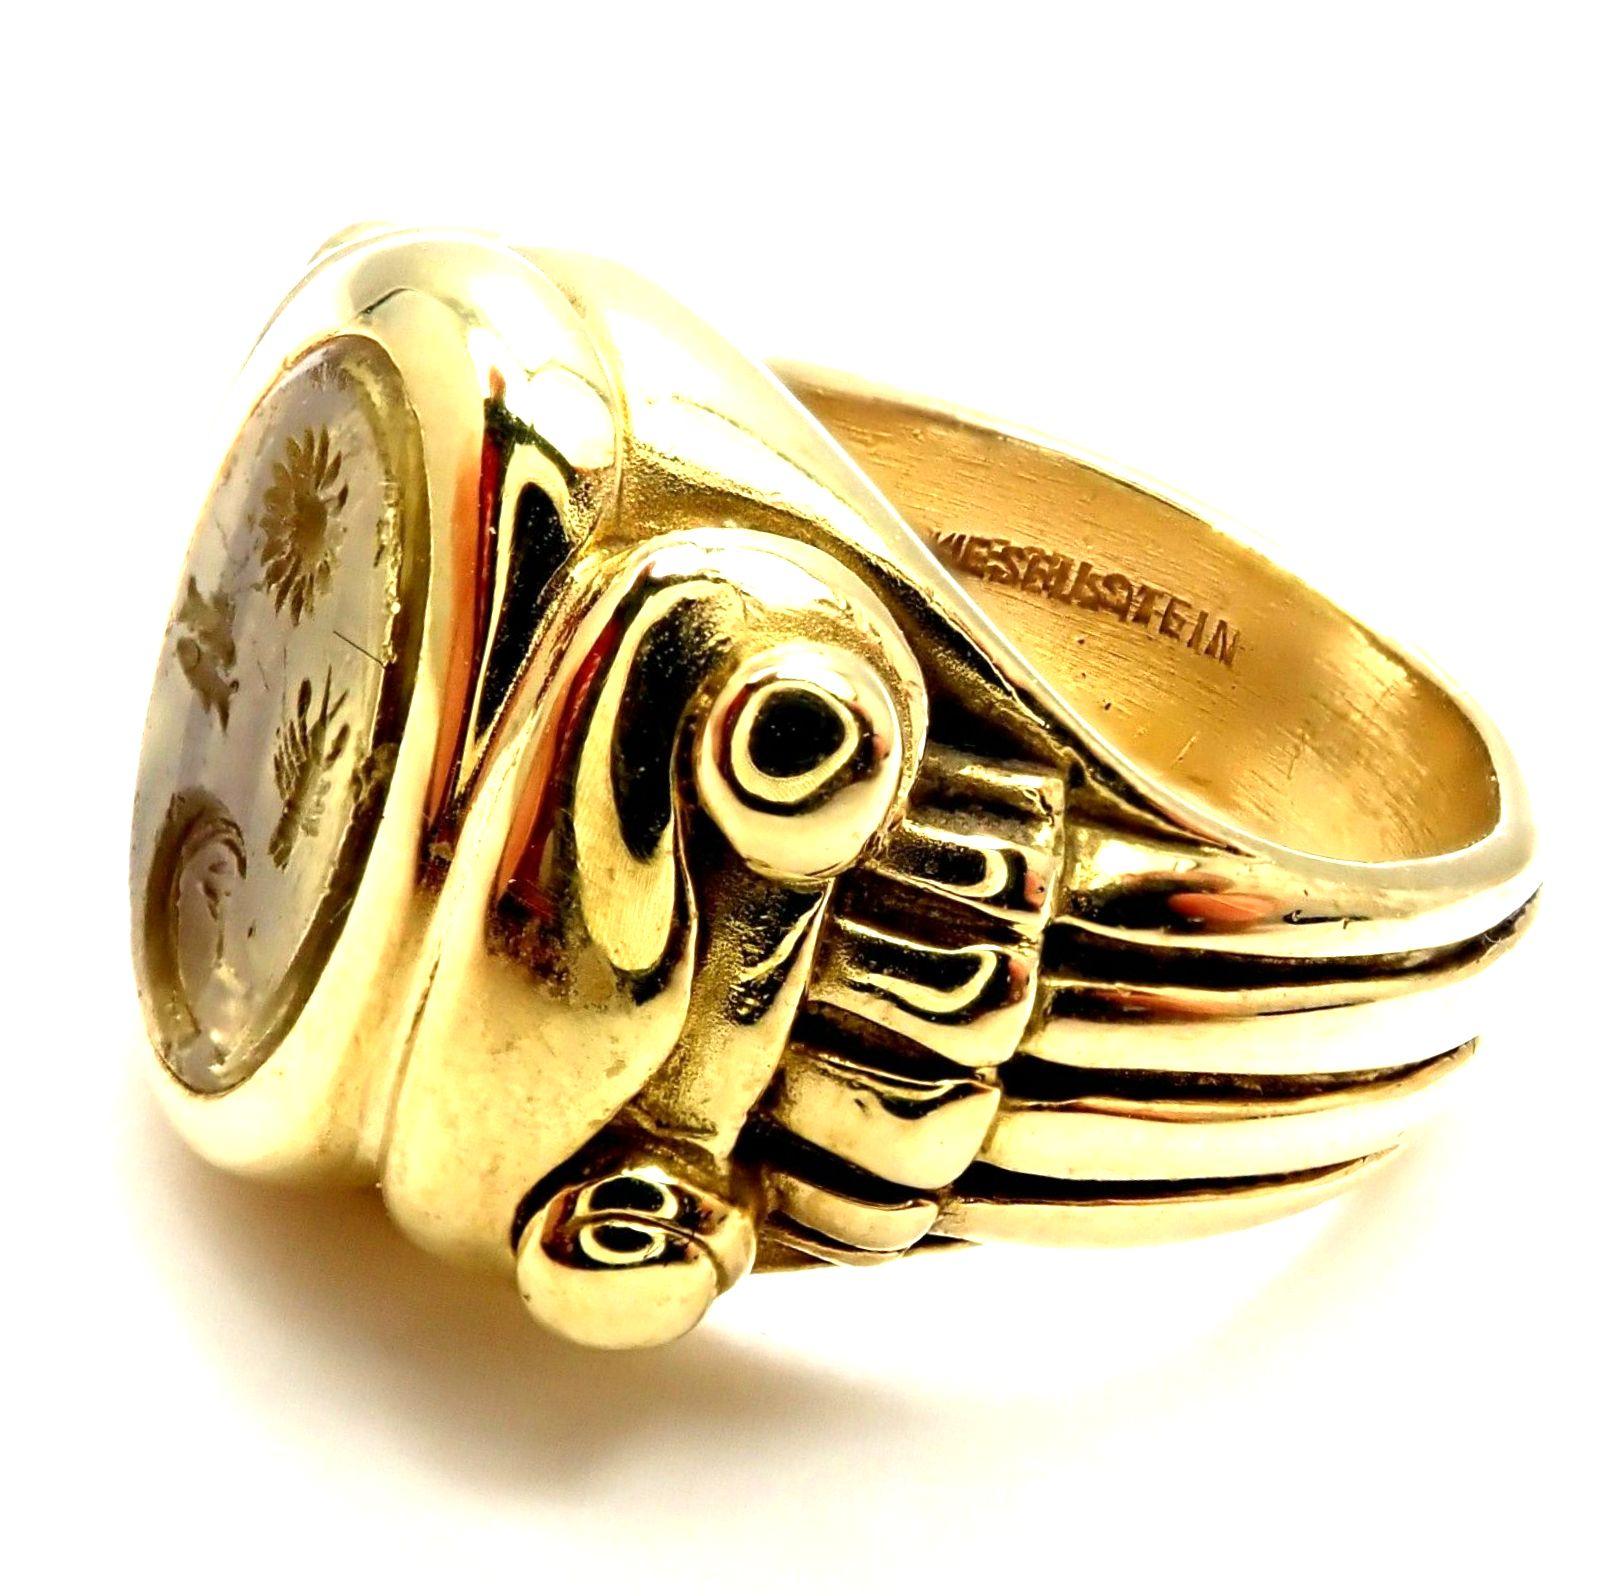 18k Yellow Gold Sun And Moon Intaglio Ring by Barry Kieselstein Cord.
Details:
Ring Size: 4 
Weight: 16.4 grams
Width: 13.5mm
Stamped Hallmarks: B. Kieselstein-Cord 750 CORD
*Free Shipping within the United States*
YOUR PRICE: $2,500
Ti534lad